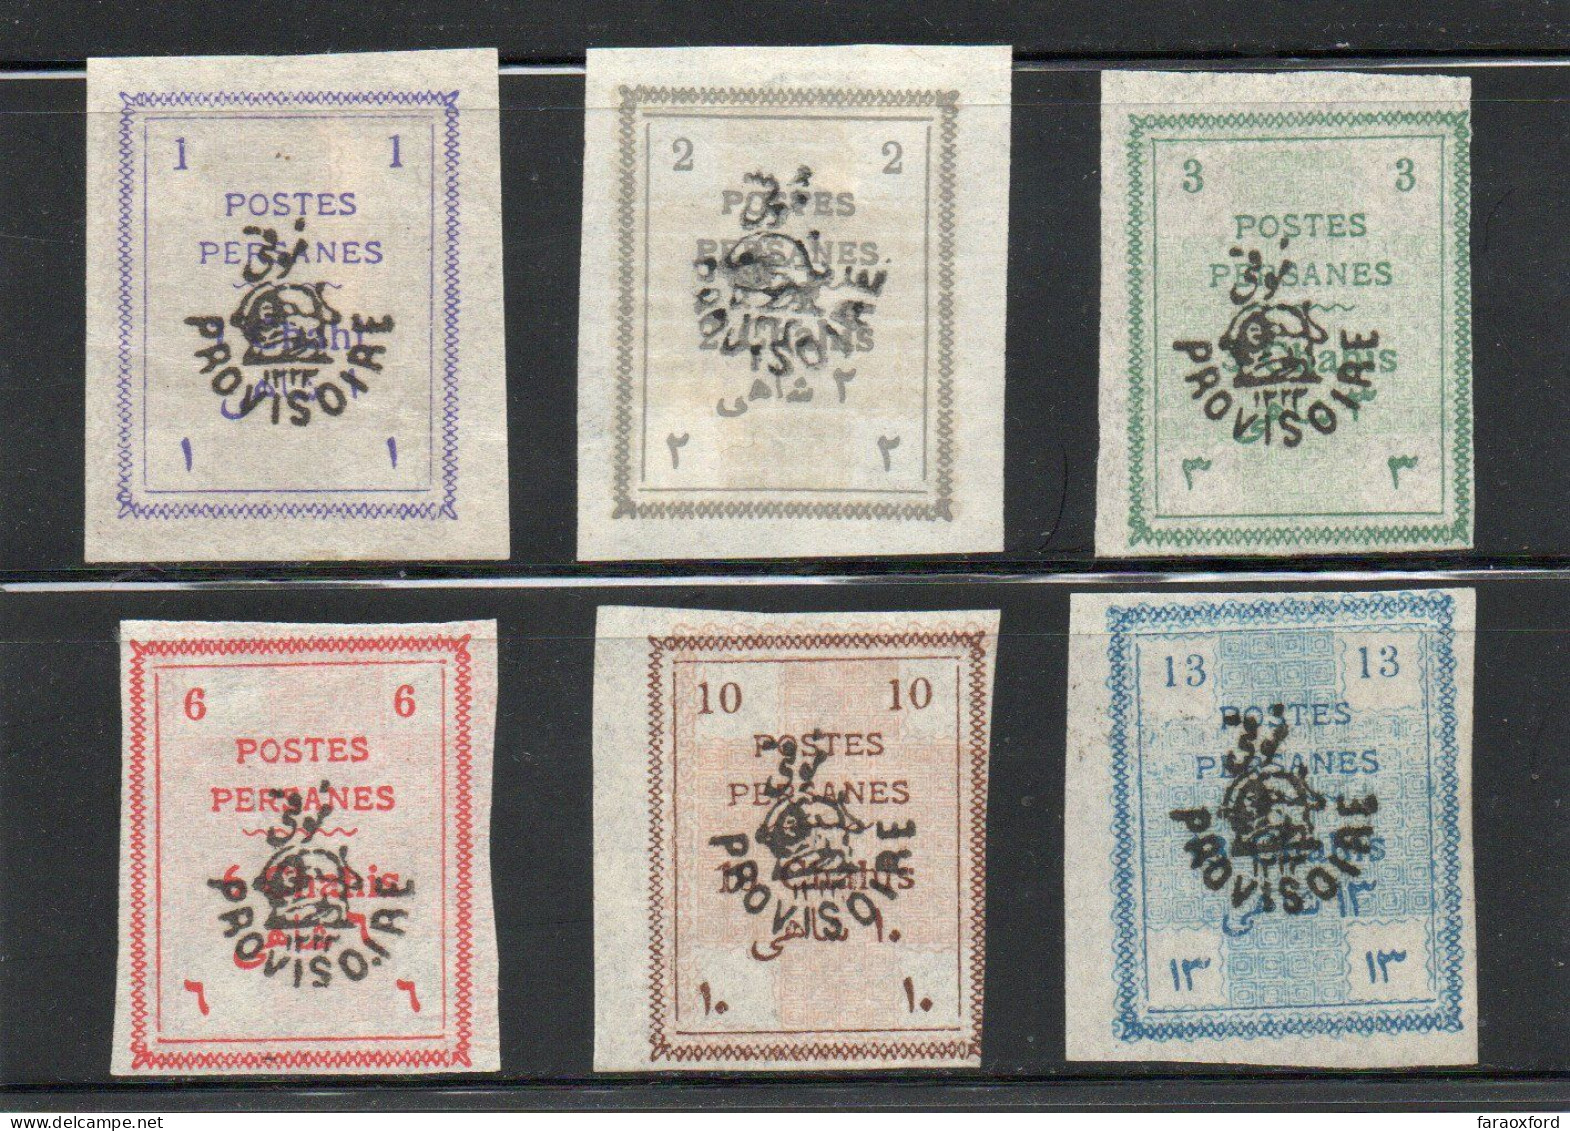 IRAN - ايران - PERSIA - 1906 - LIONS WITH PROVISOIRE OVERPRINTS - COMPLETE SET OF STAMPS - VERY GOOD MINT - Irán